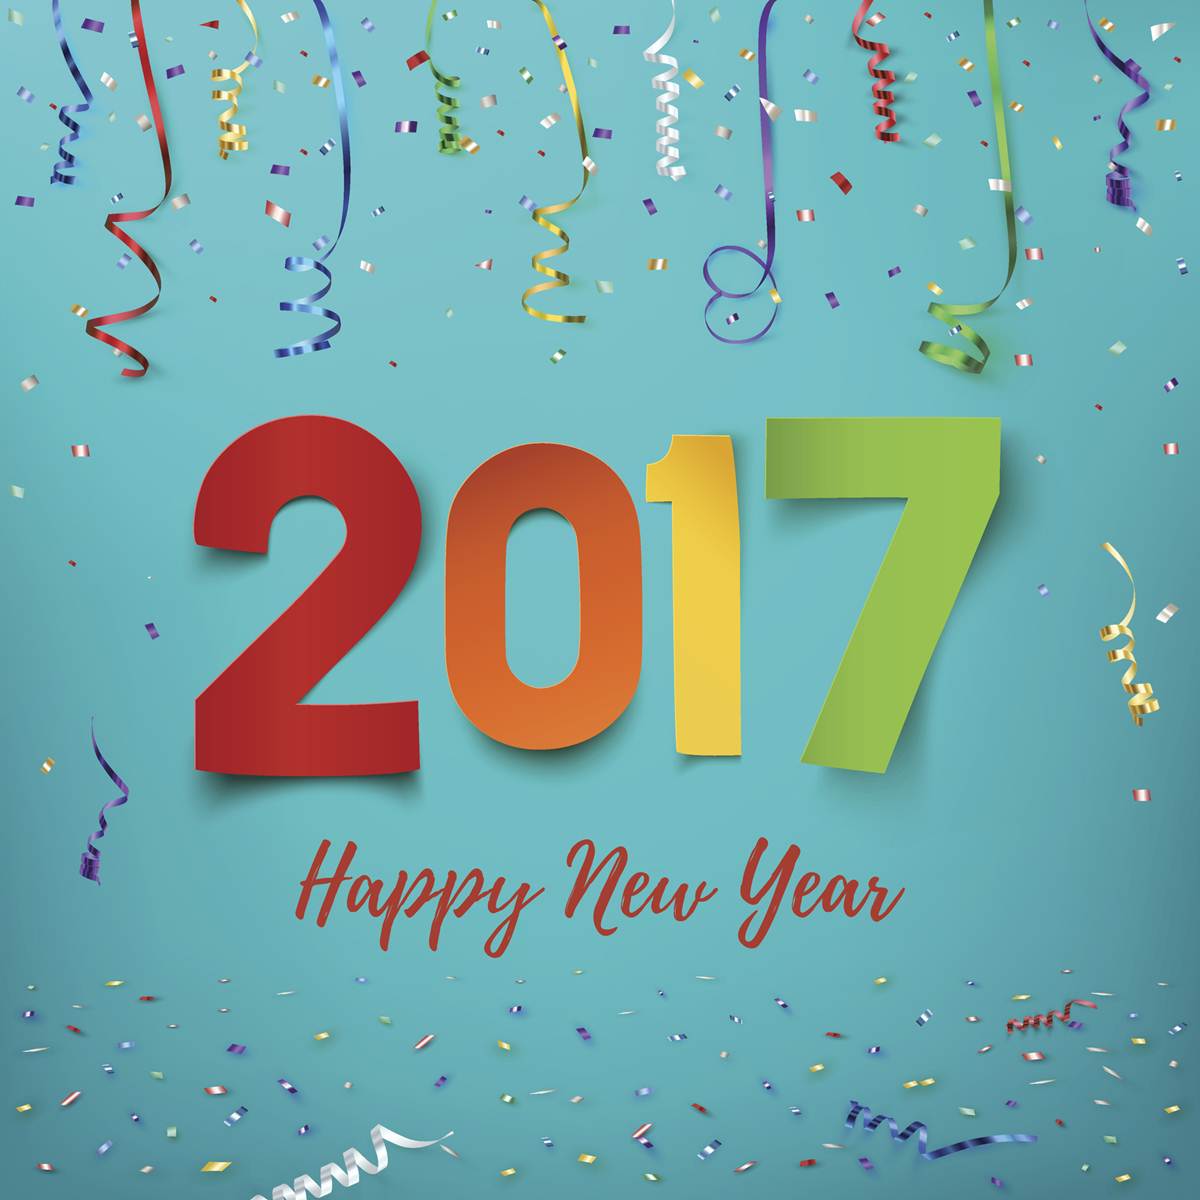 Happy New Year 2017 Wishes Greetings Importance And